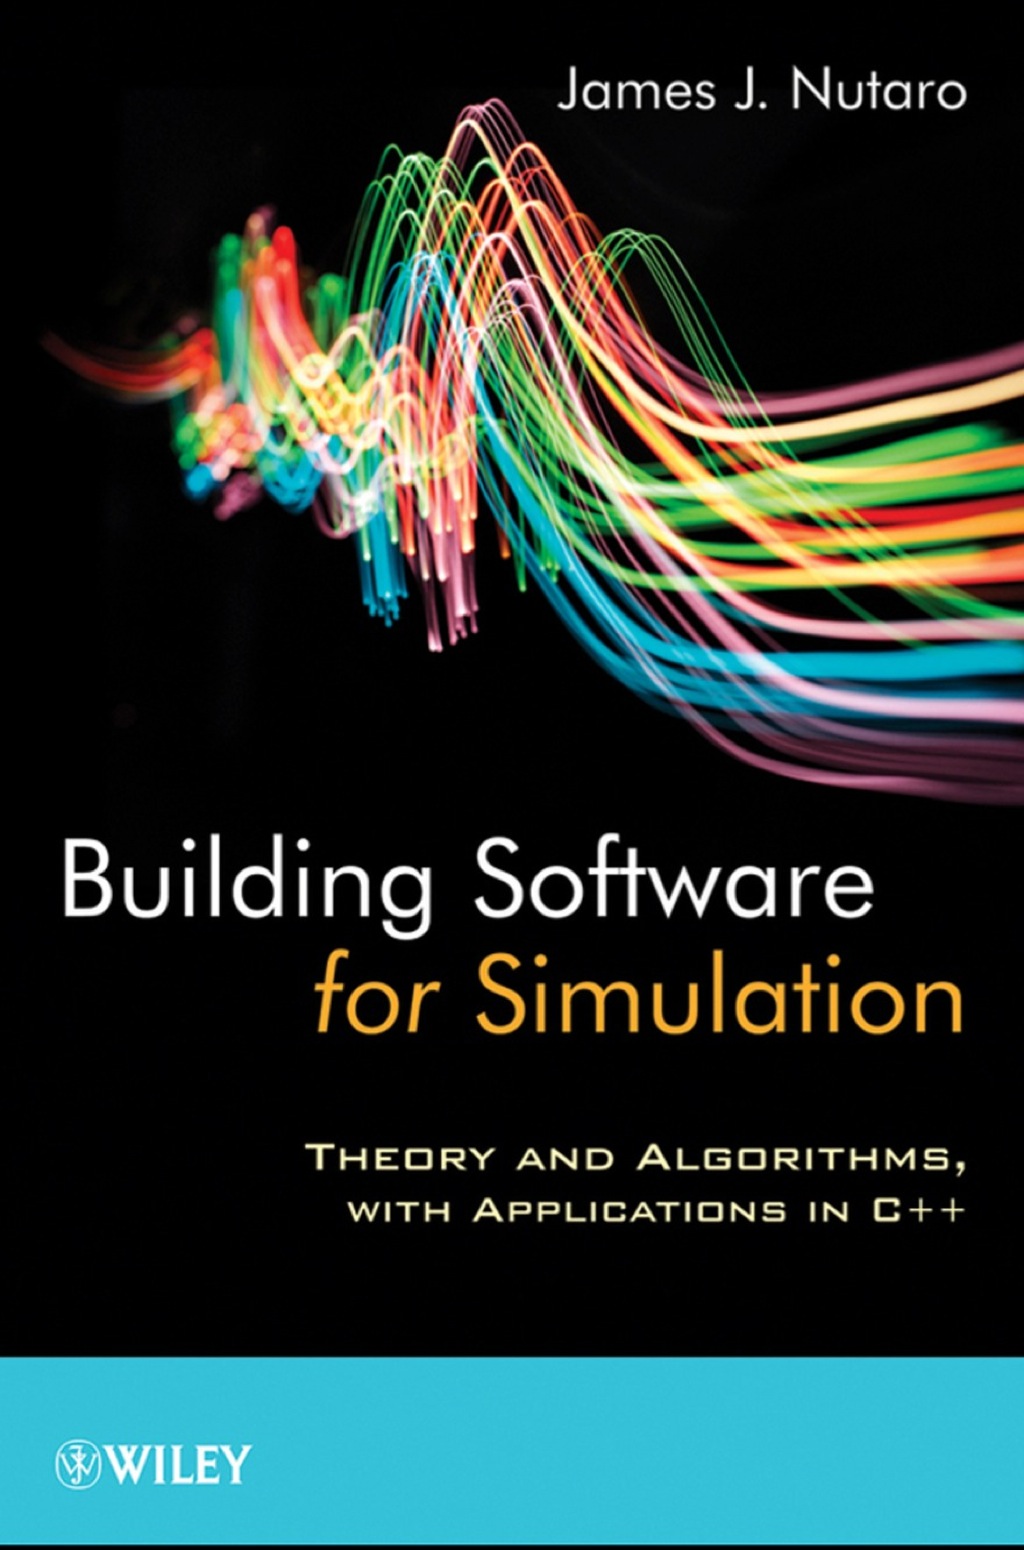 Building Software for Simulation: Theory and Algorithms  with Applications in C++ (eBook) - James J. Nutaro,